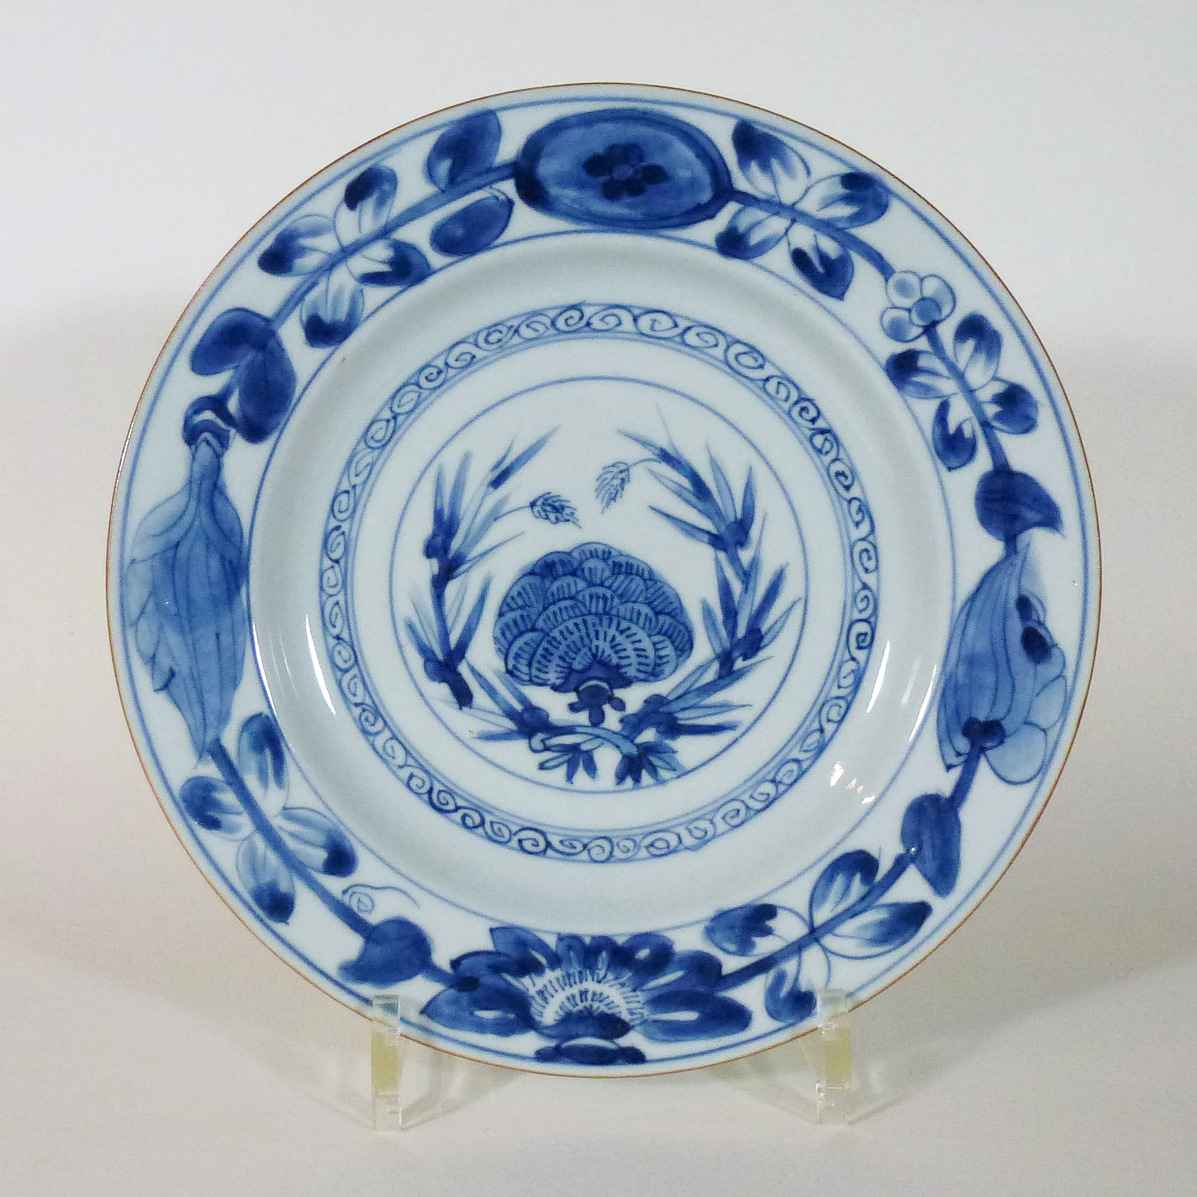 Chinese Kangxi Plate – "The suffering of Christ"